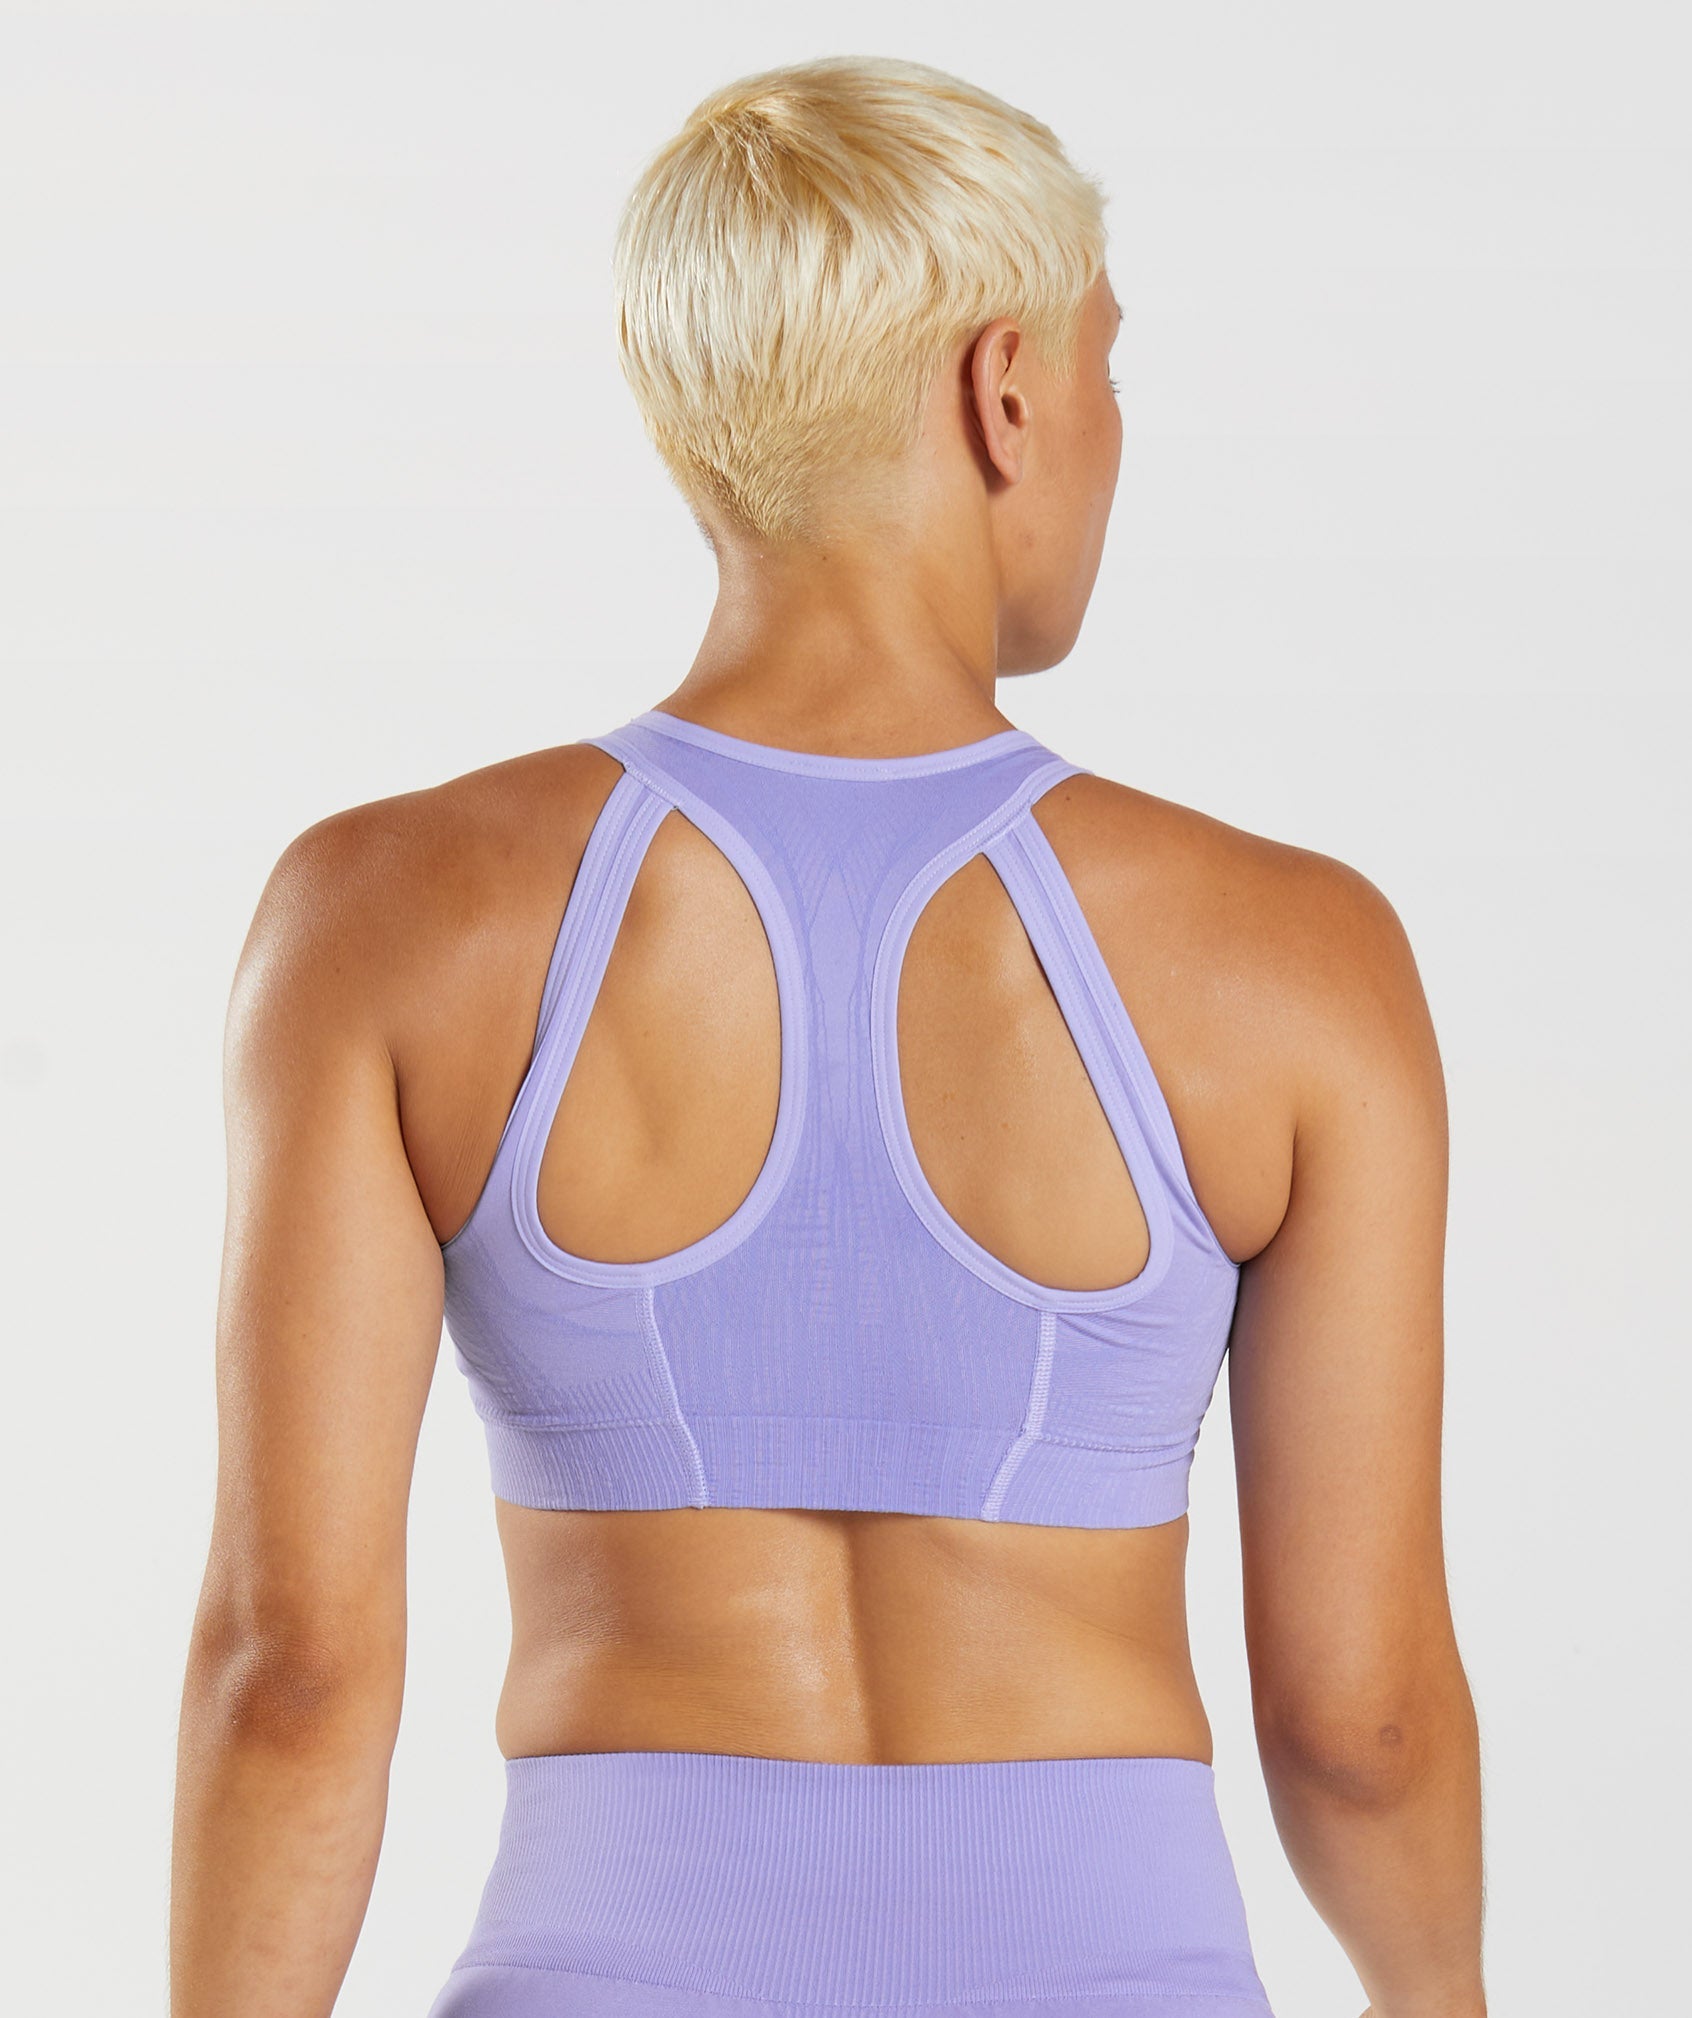 Apex Seamless Sports Bra in Digital Violet/Dusted Violet - view 2